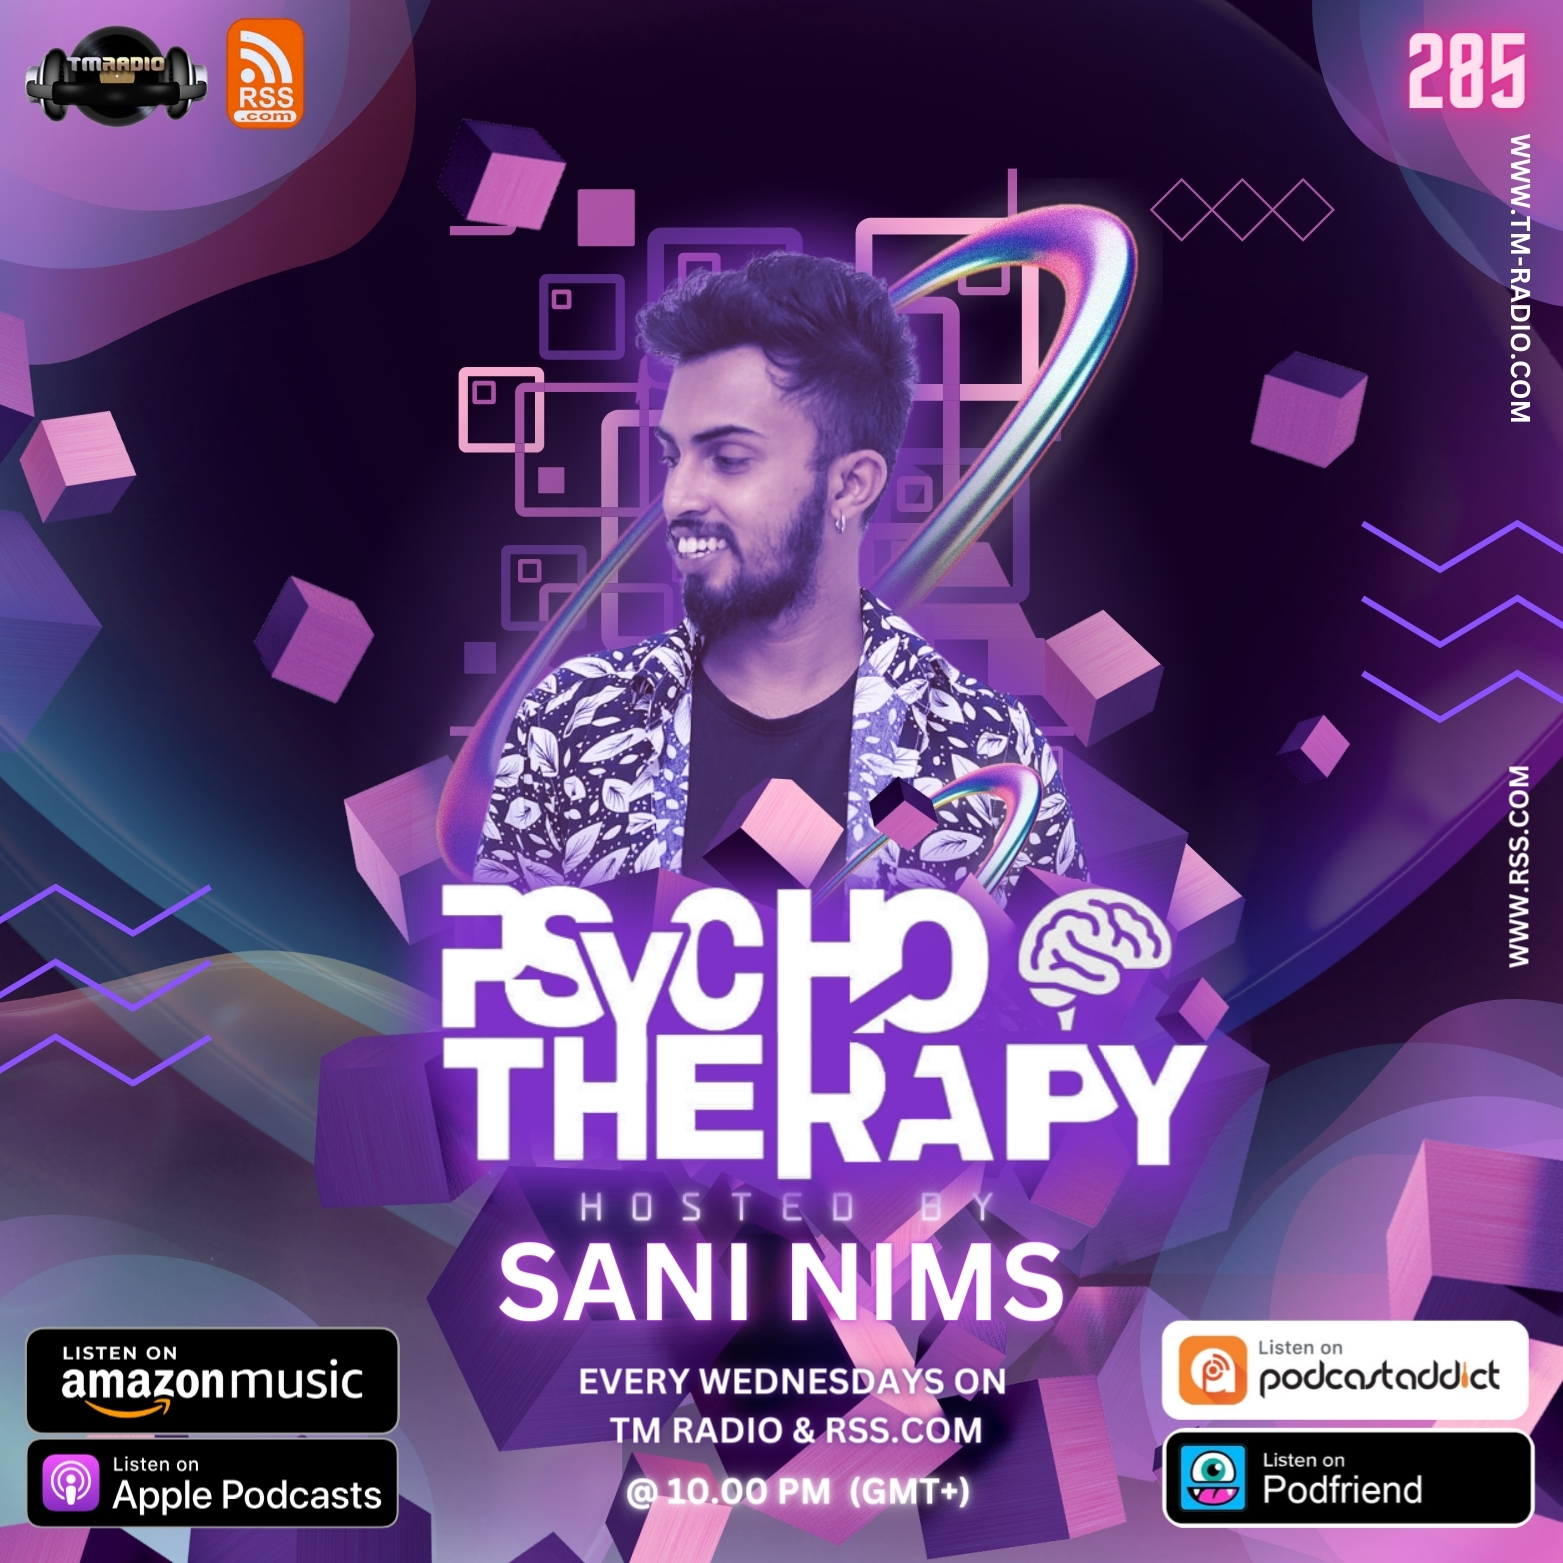 PSYCHO THERAPY EP 285 BY SANI NIMS ON TM RADIO (from March 20th)